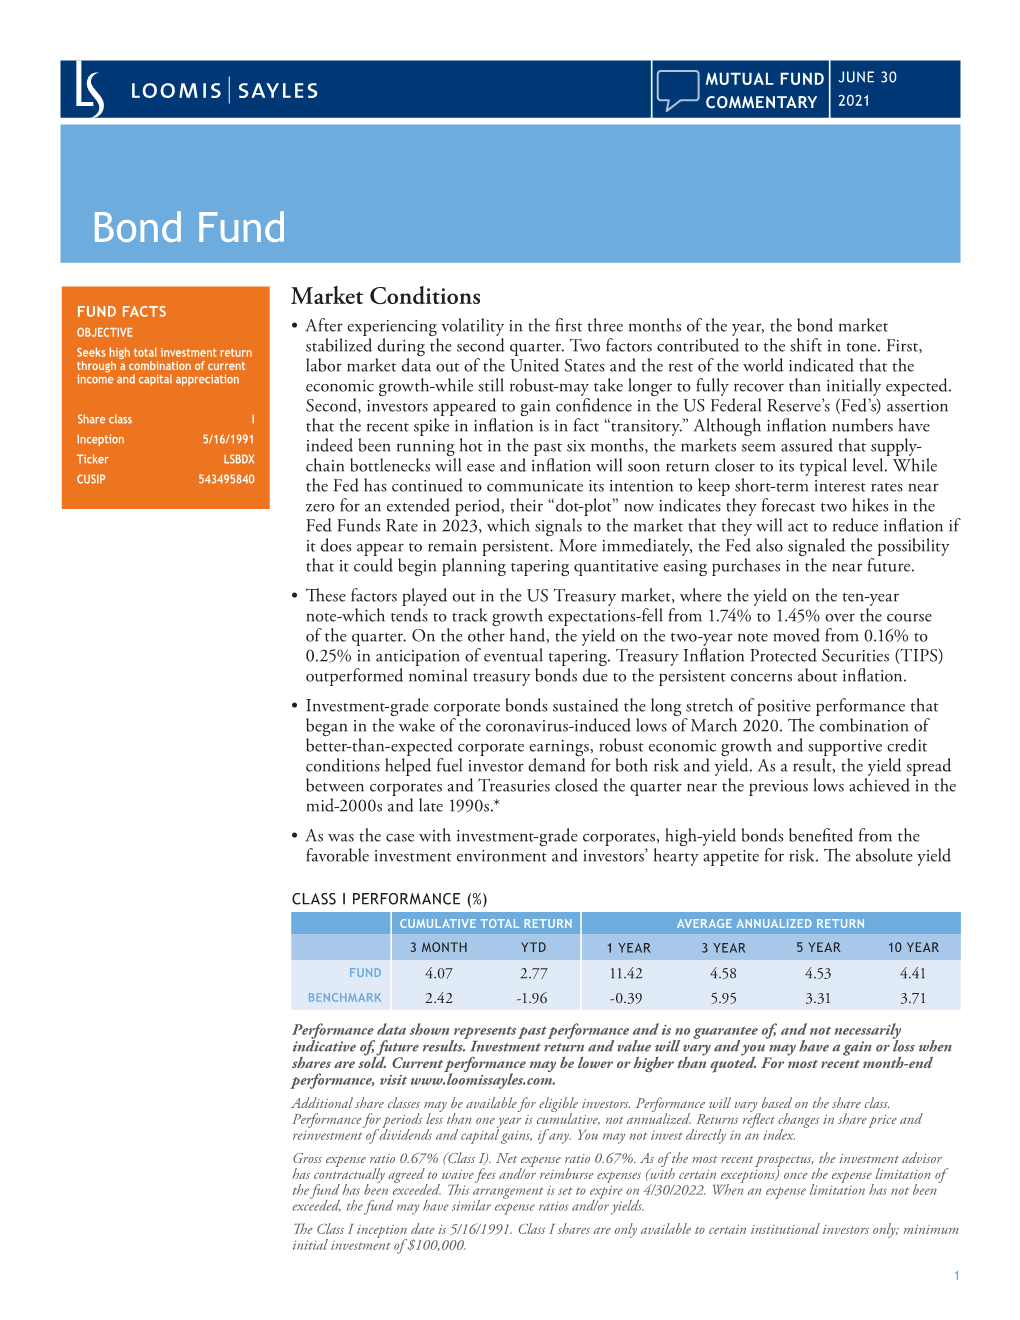 Bond Fund Commentary